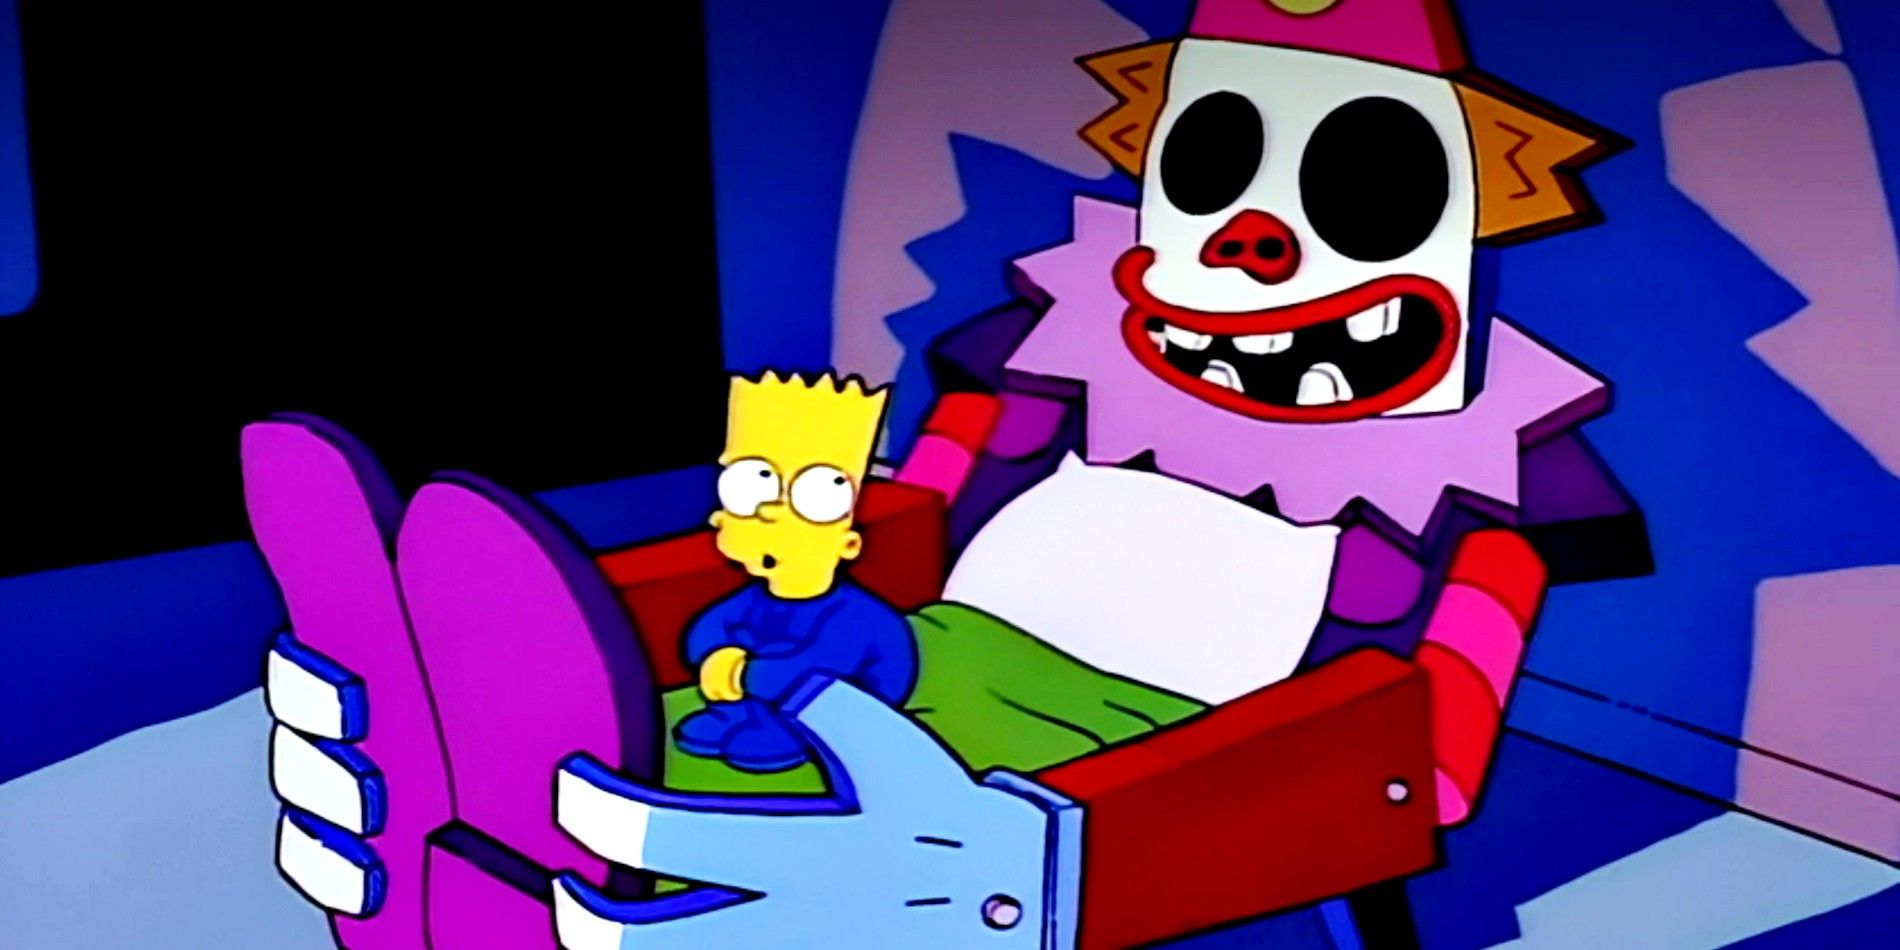 A young Bart looking at the scary clown bed in The Simpsons season 4 episode